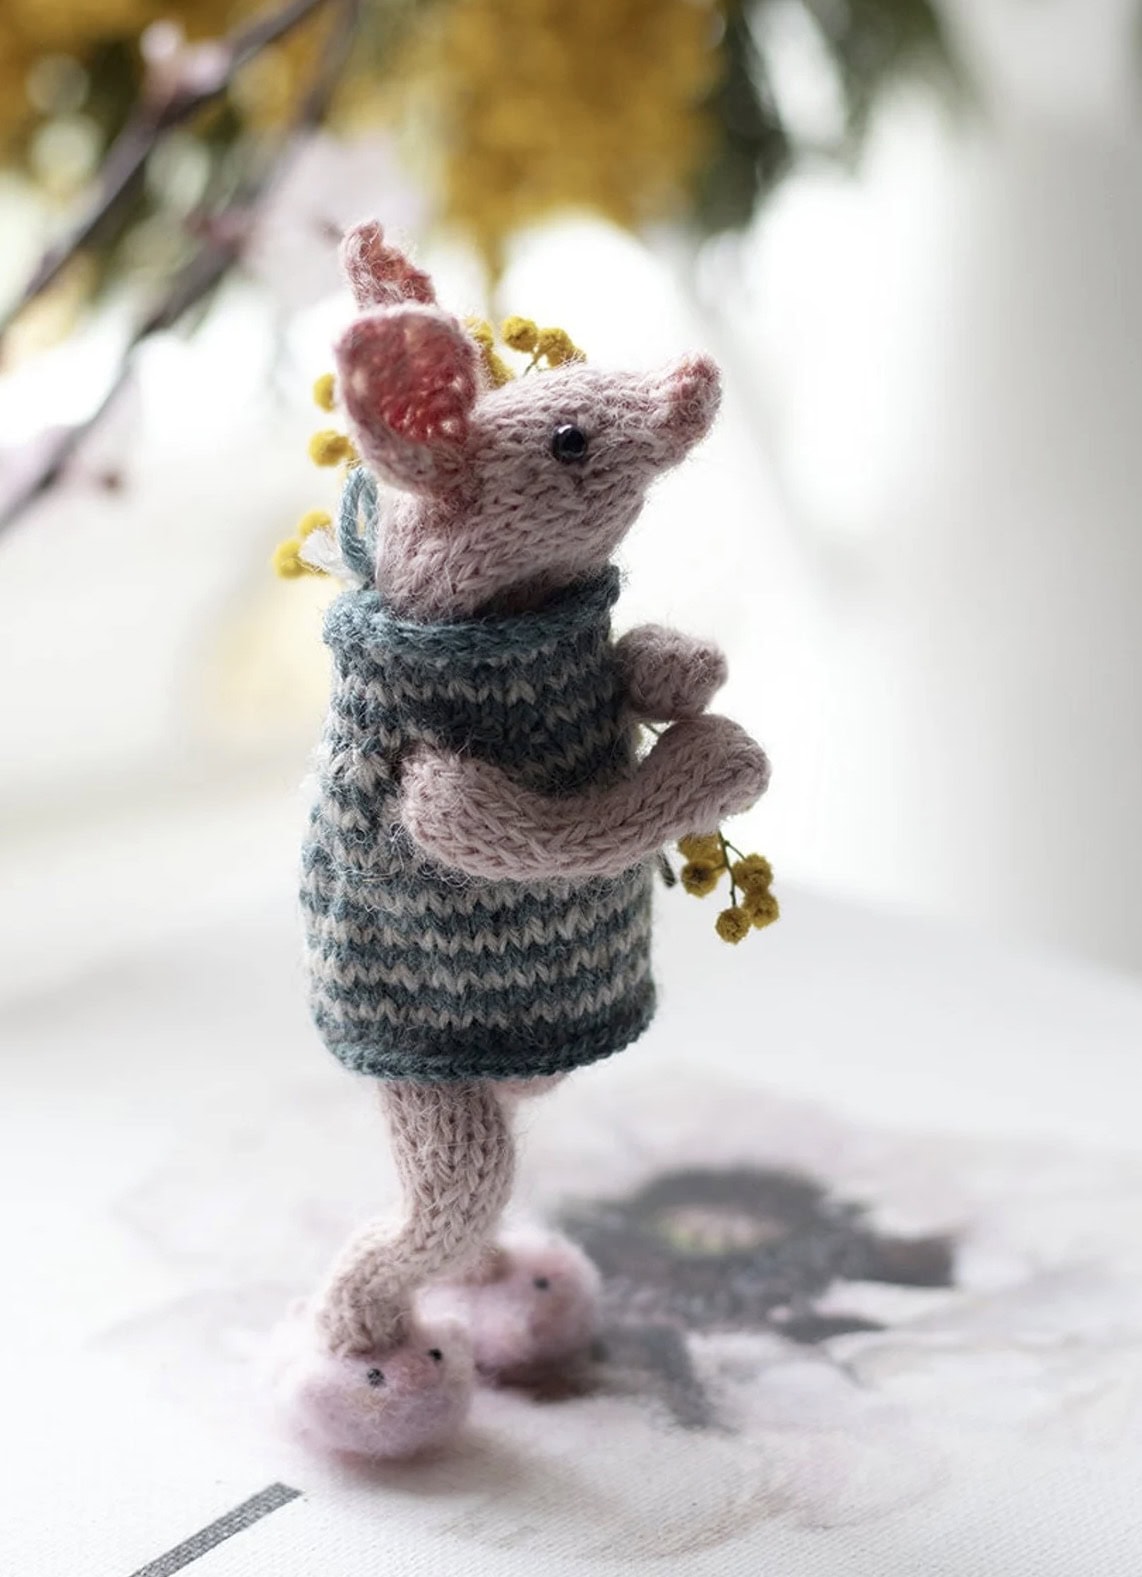 Piglet knitting pattern by Claire Garland aka Dot Pebbles Knits - part of her Winnie the Pooh collection that includes Eeyore and Honey Bear inspired by Pooh Bear. All lovable and easy to knit. Click through to get your PDF download pattern today and start knitting!